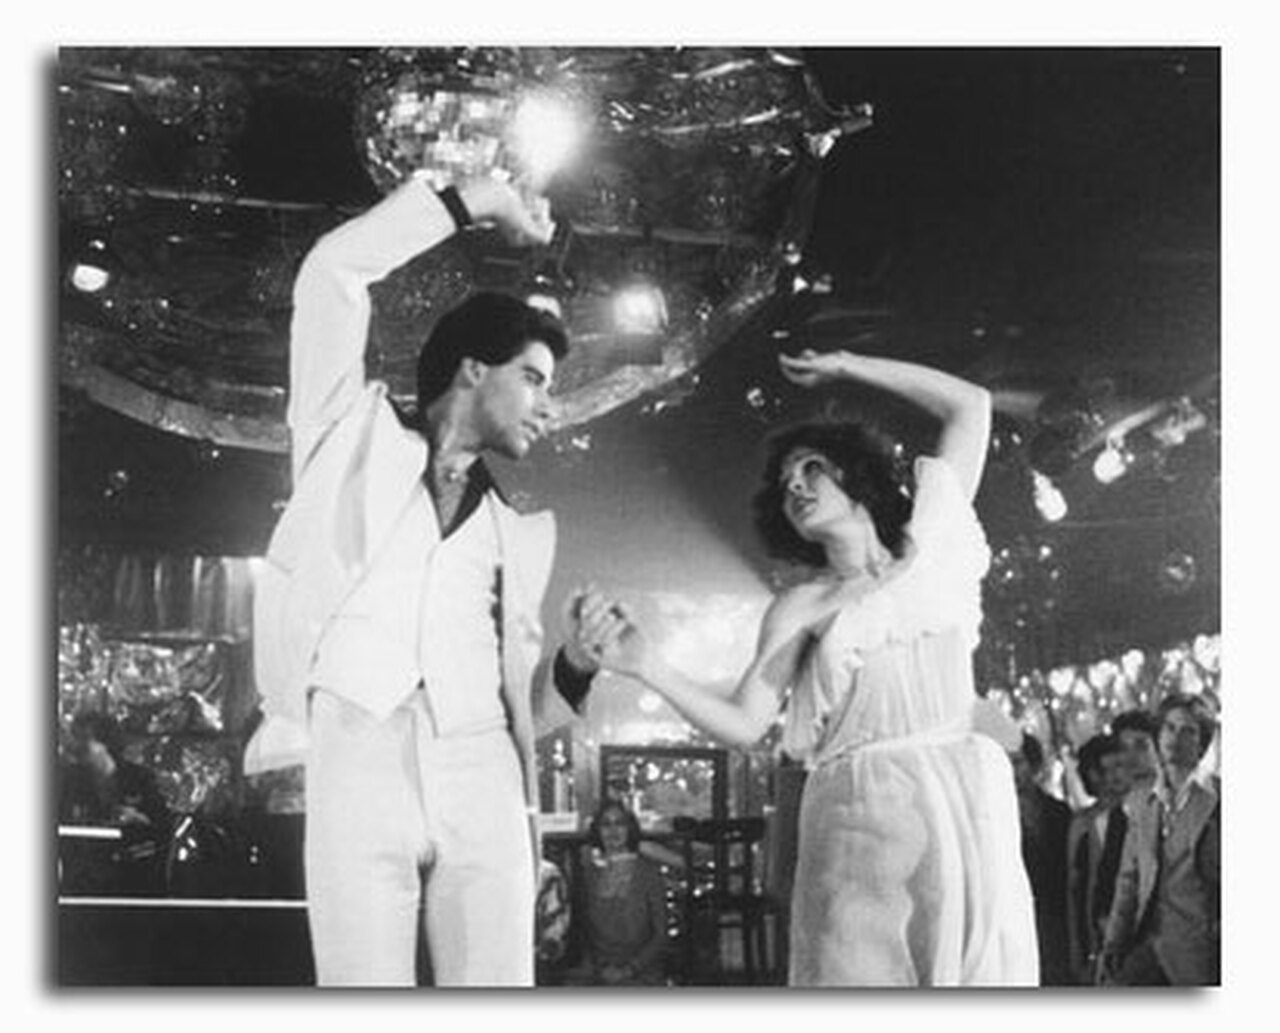 SS2299245) Movie picture of Saturday Night Fever buy celebrity photo and posters at Starstills.com